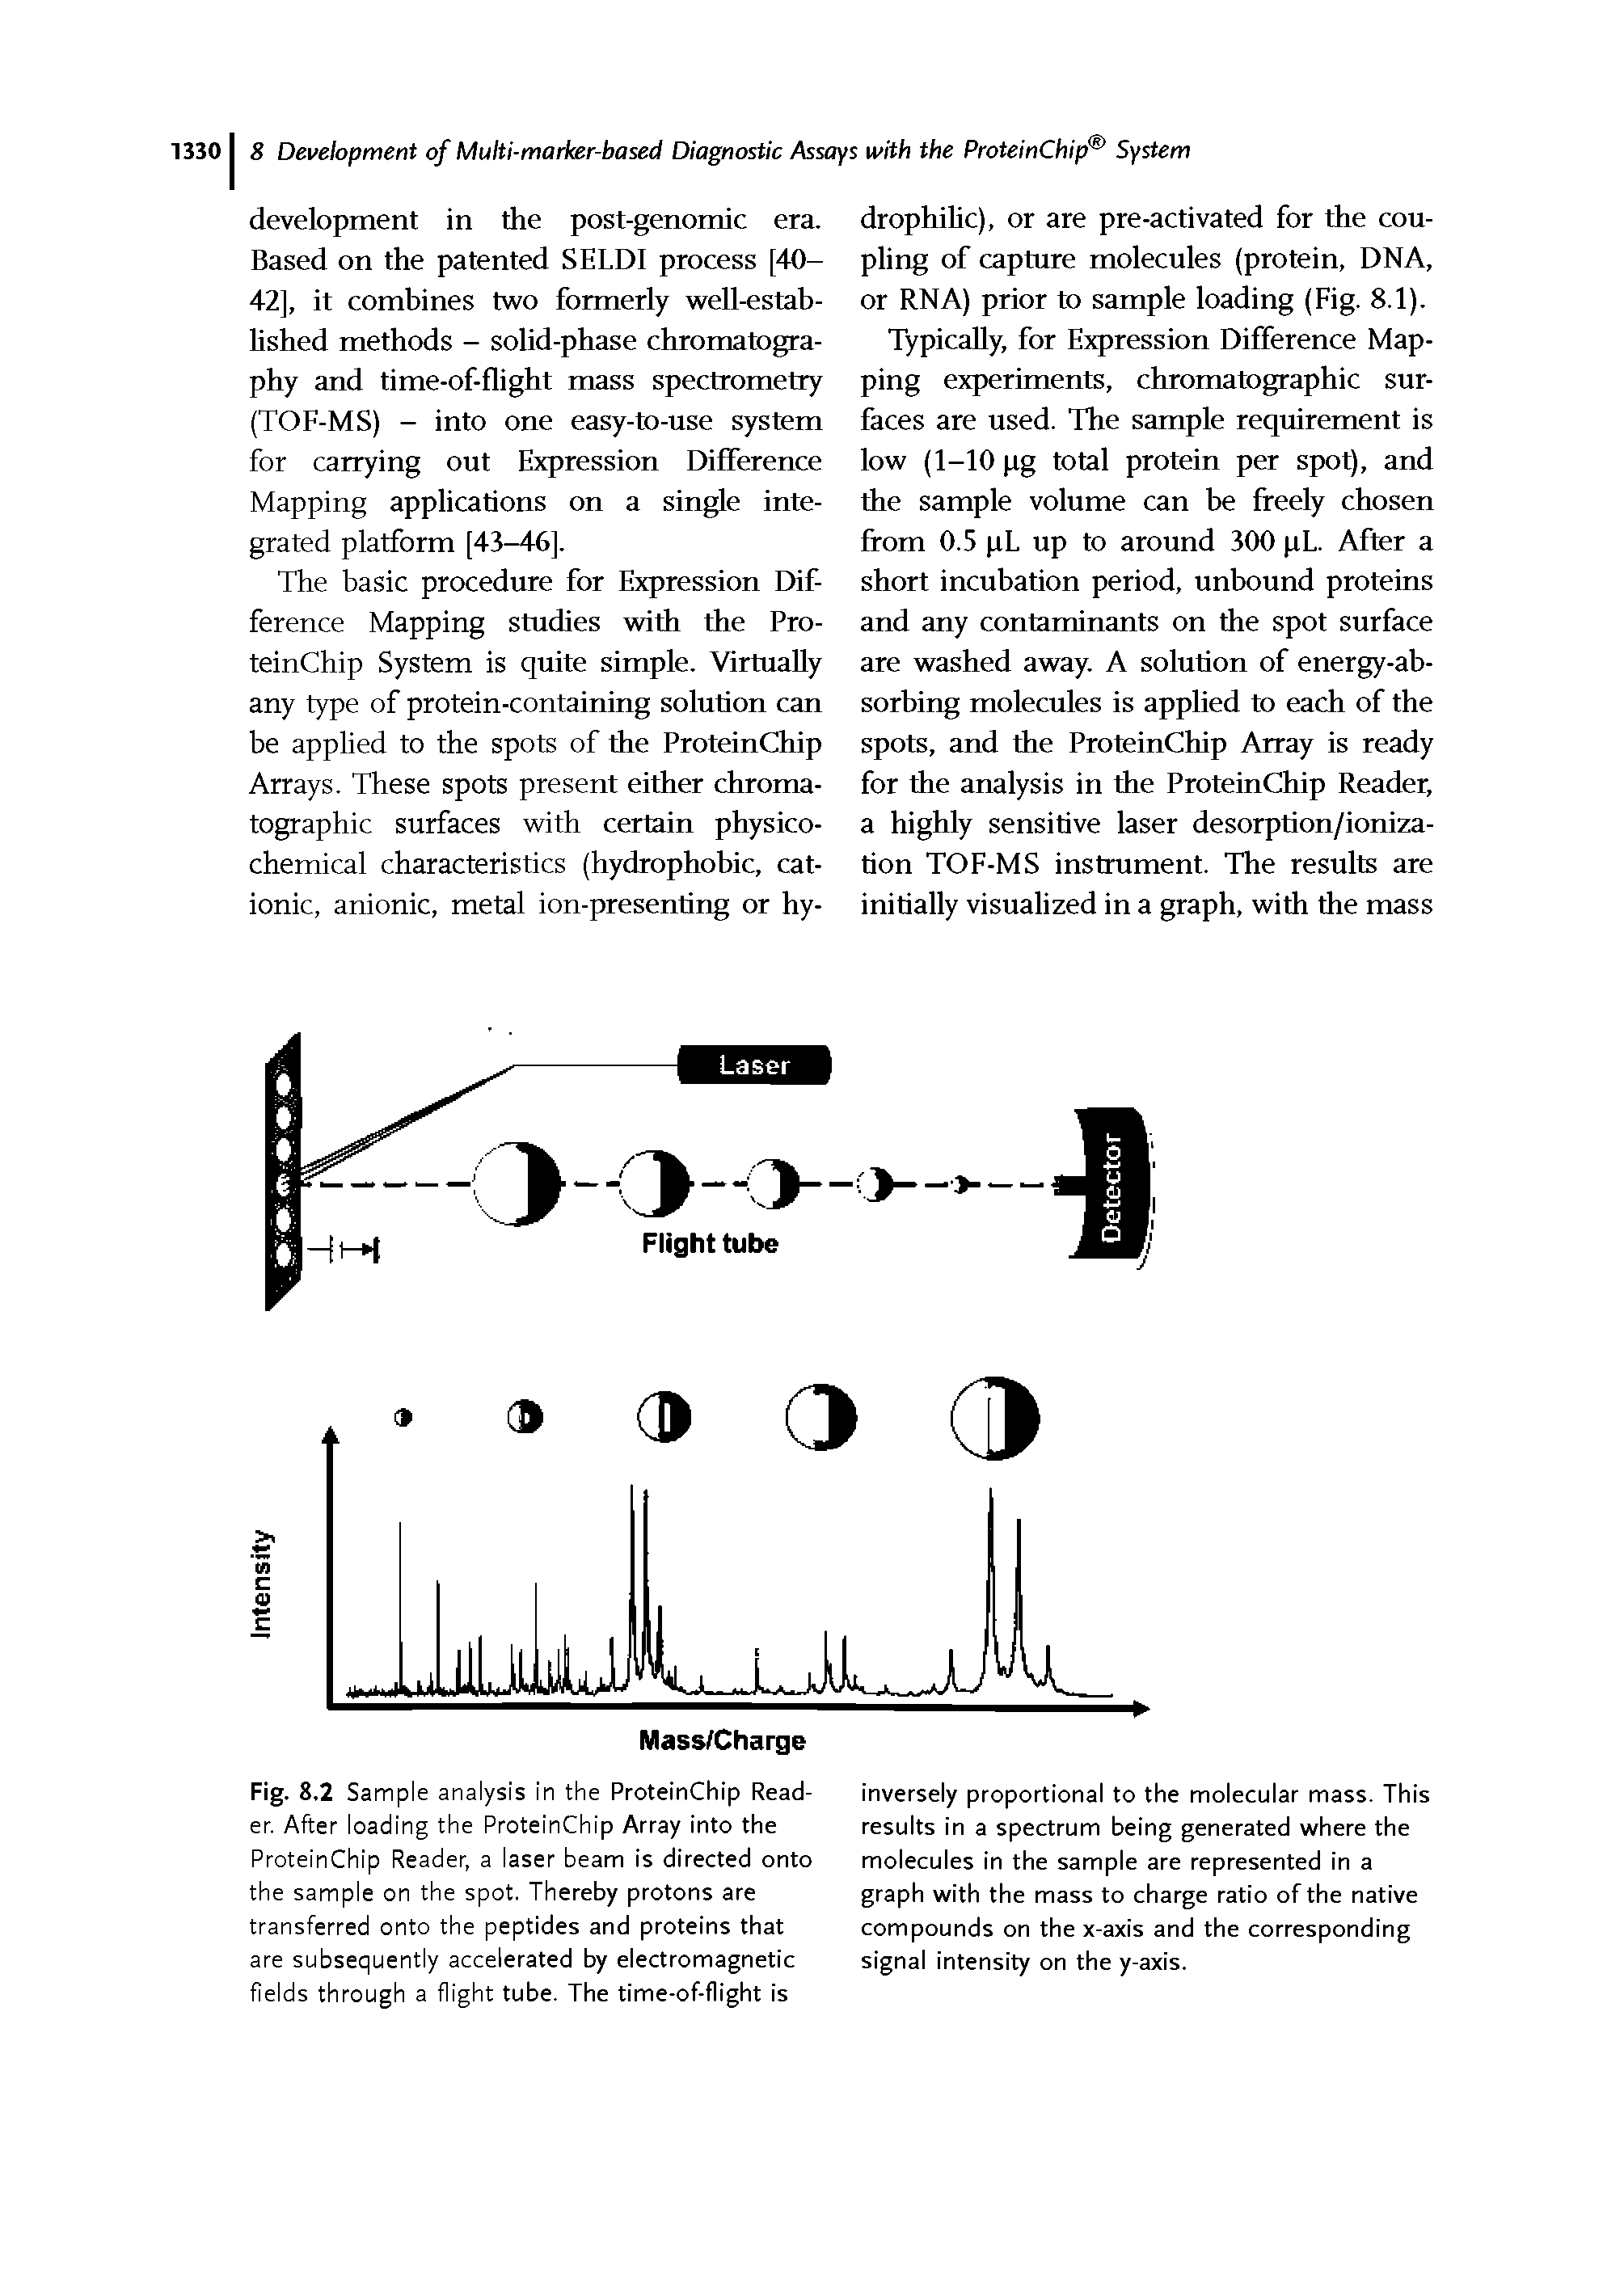 Fig. 8.2 Sample analysis in the ProteinChip Reader. After loading the ProteinChip Array into the ProteinChip Reader, a laser beam is directed onto the sample on the spot. Thereby protons are transferred onto the peptides and proteins that are subsequently accelerated by electromagnetic fields through a flight tube. The time-of-flight is...